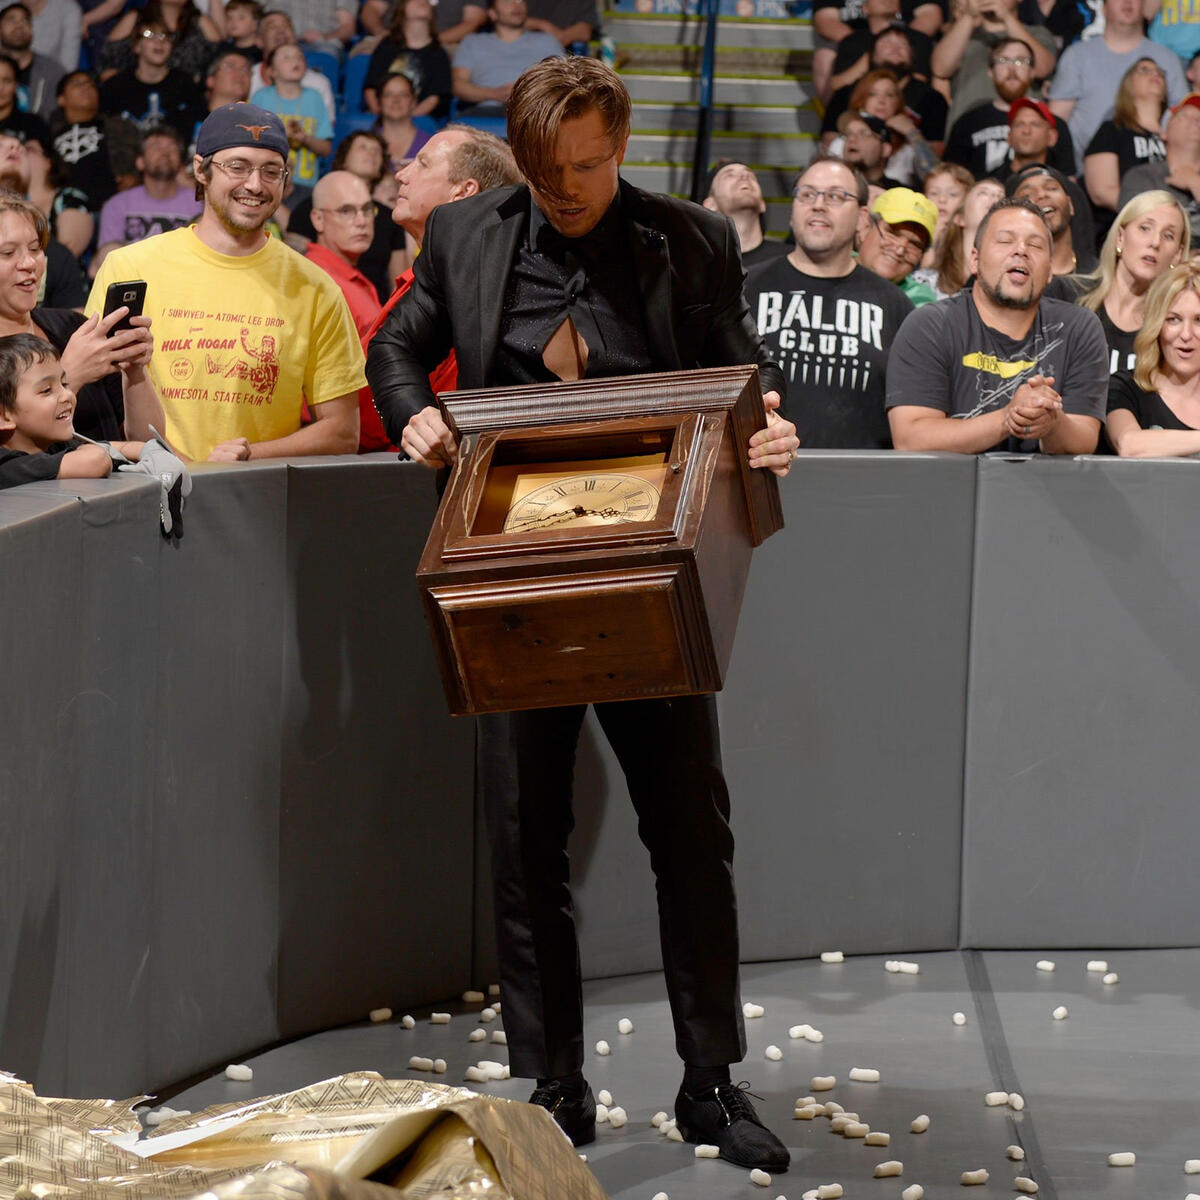 Miz is shocked to find out that the present contained a grandfather clock, which was a gift to him from Maryse.